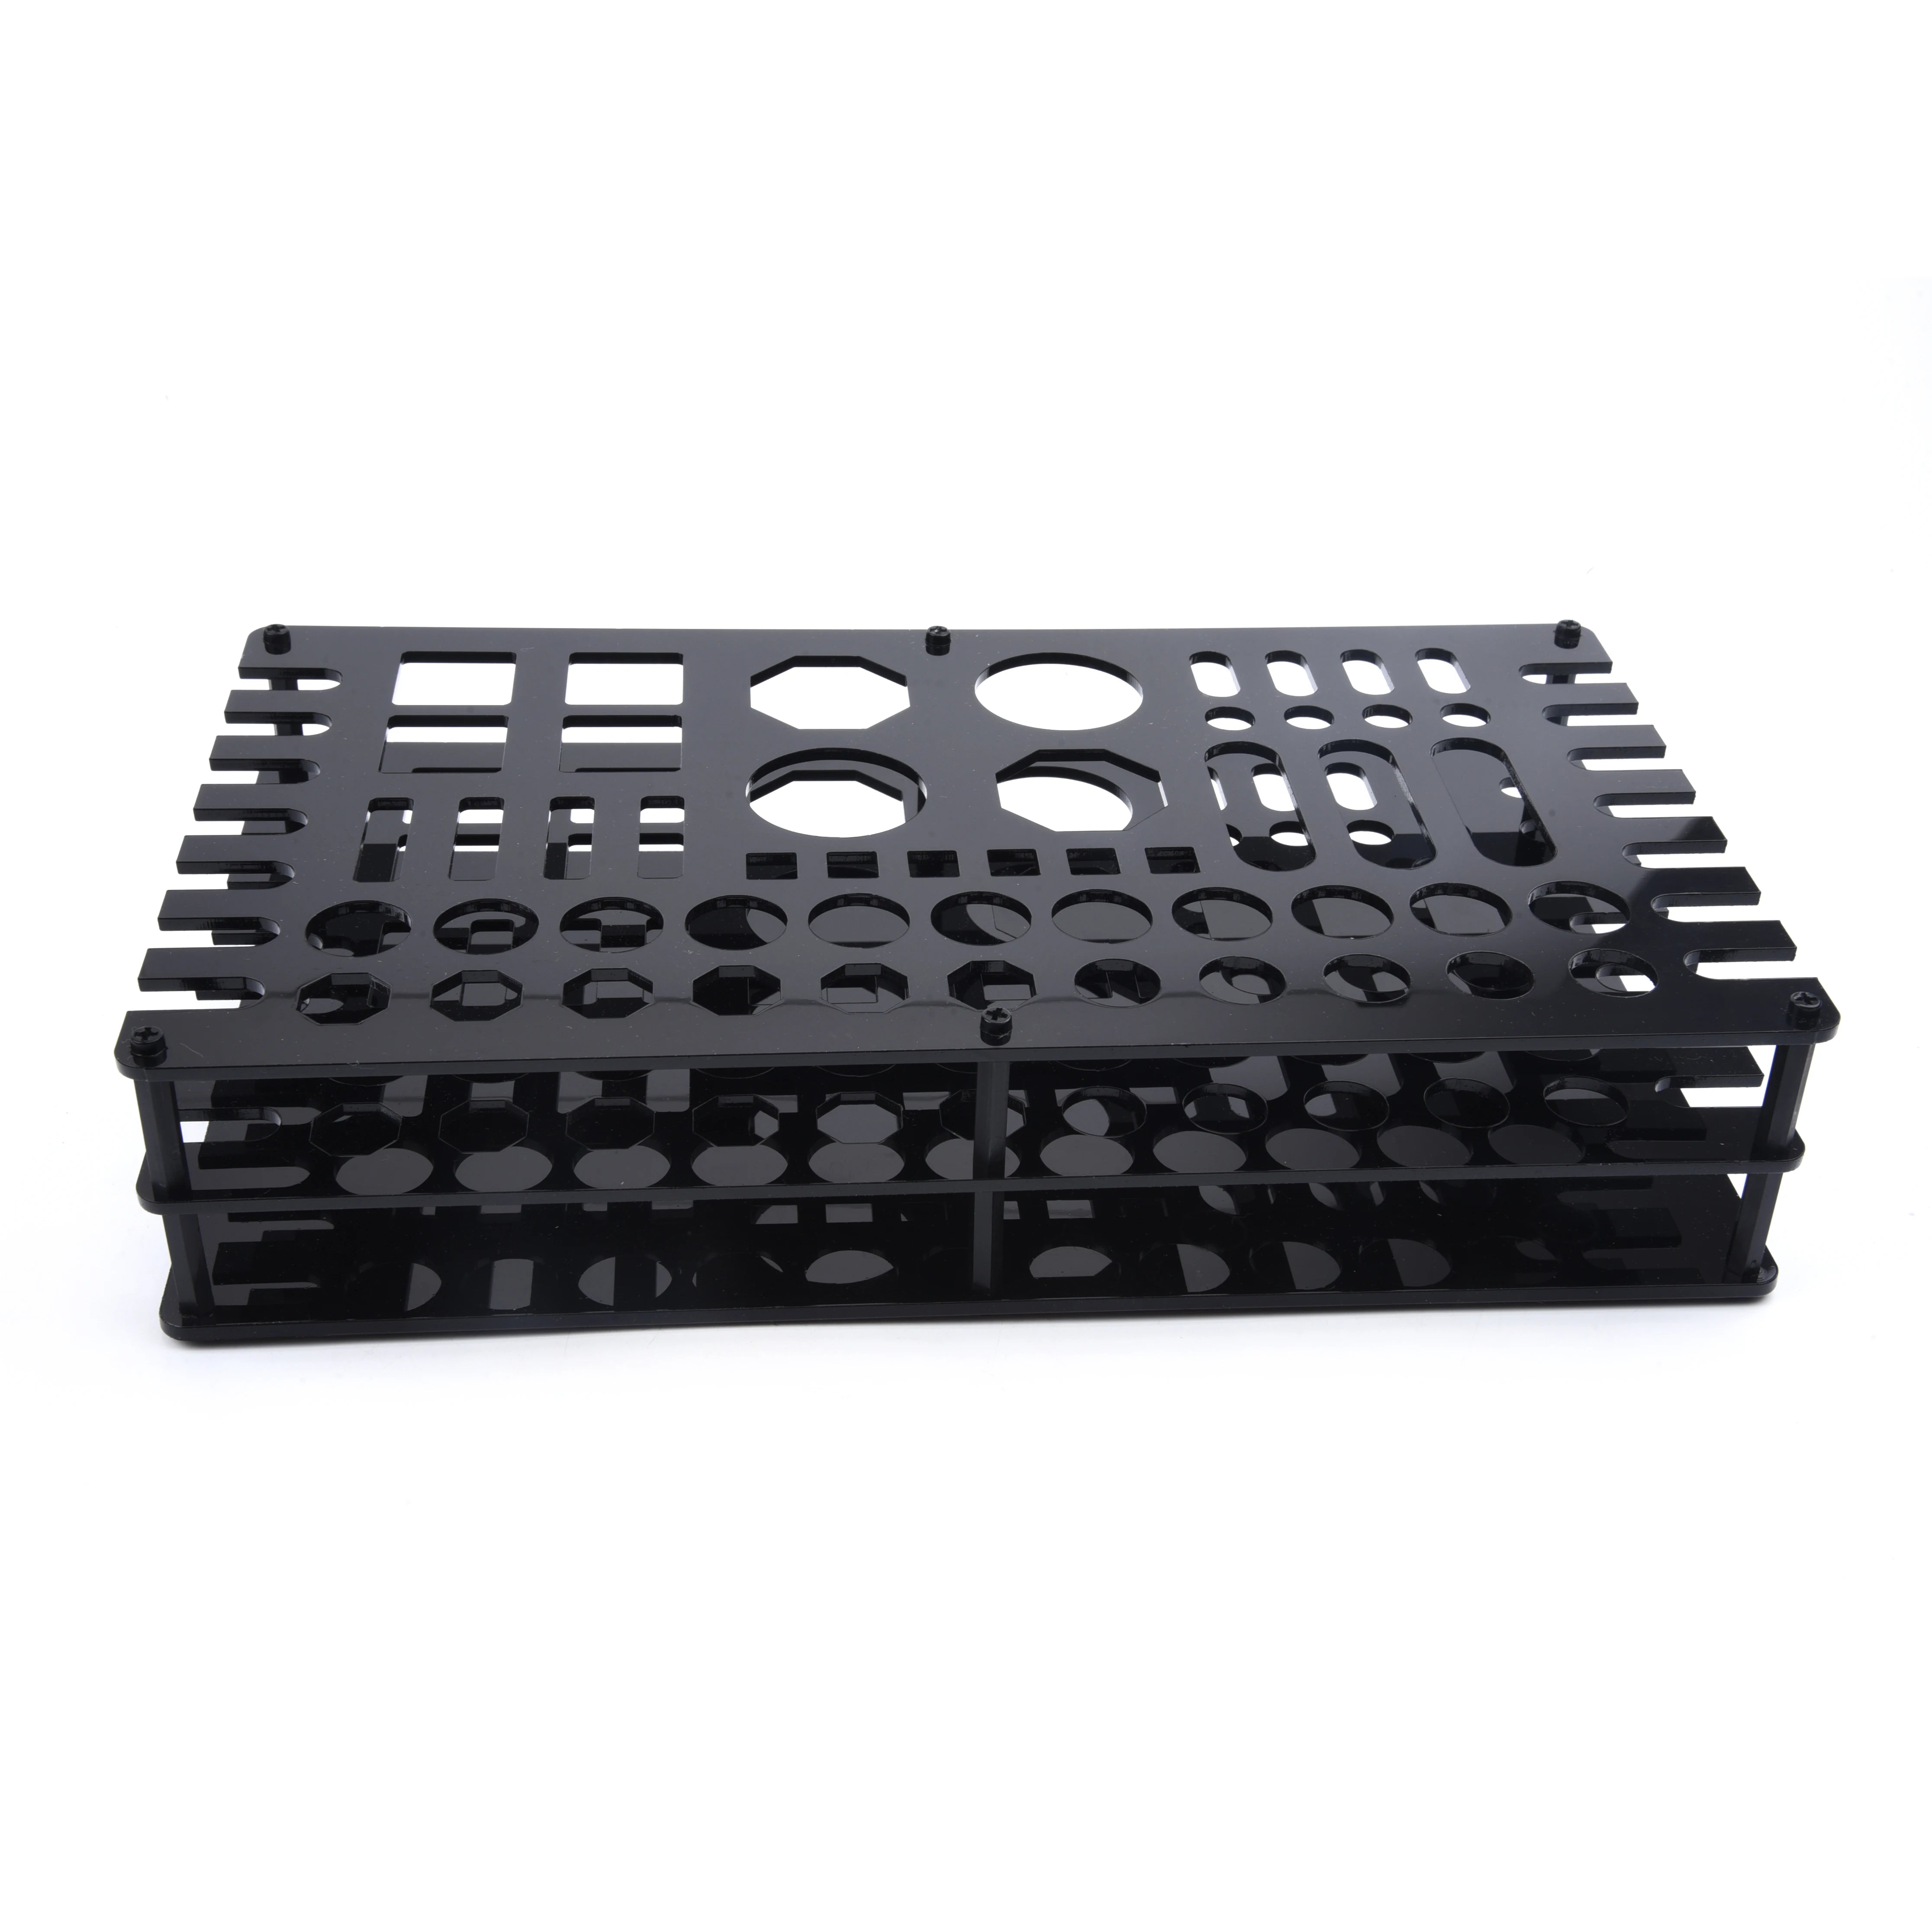 63 Hole Screwdriver Storage Rack Holder, DIY unassemble package, enjoy the process to finish a tool stand